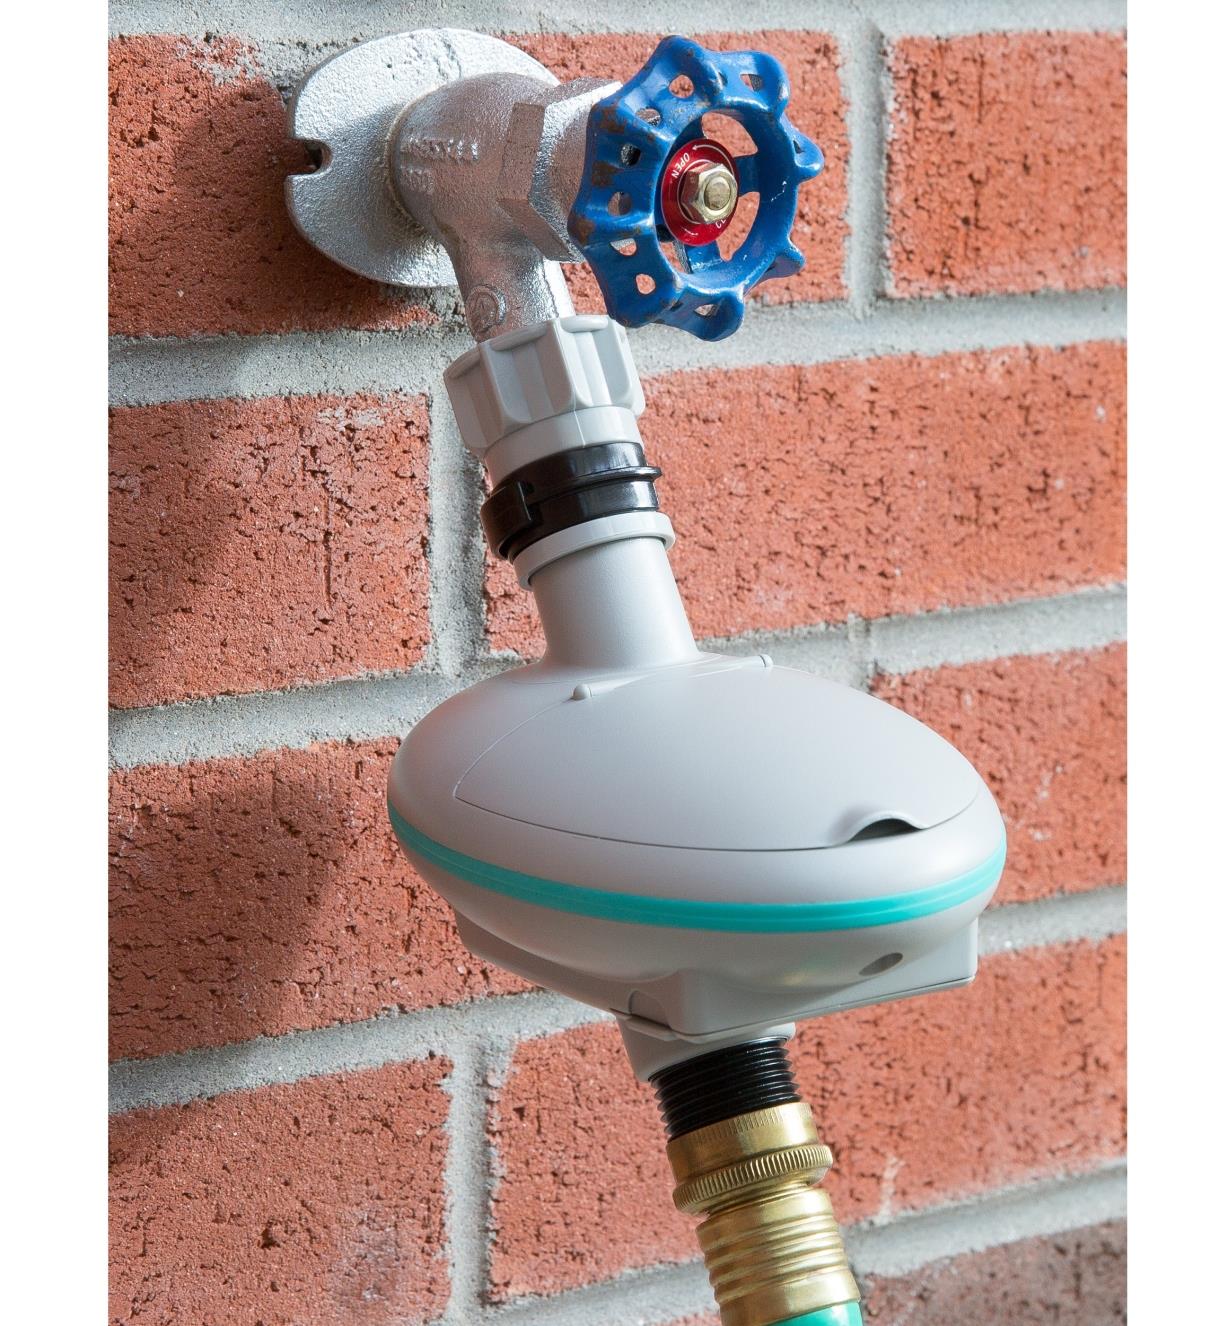 Dial-Operated Water Timer connected to a faucet and hose